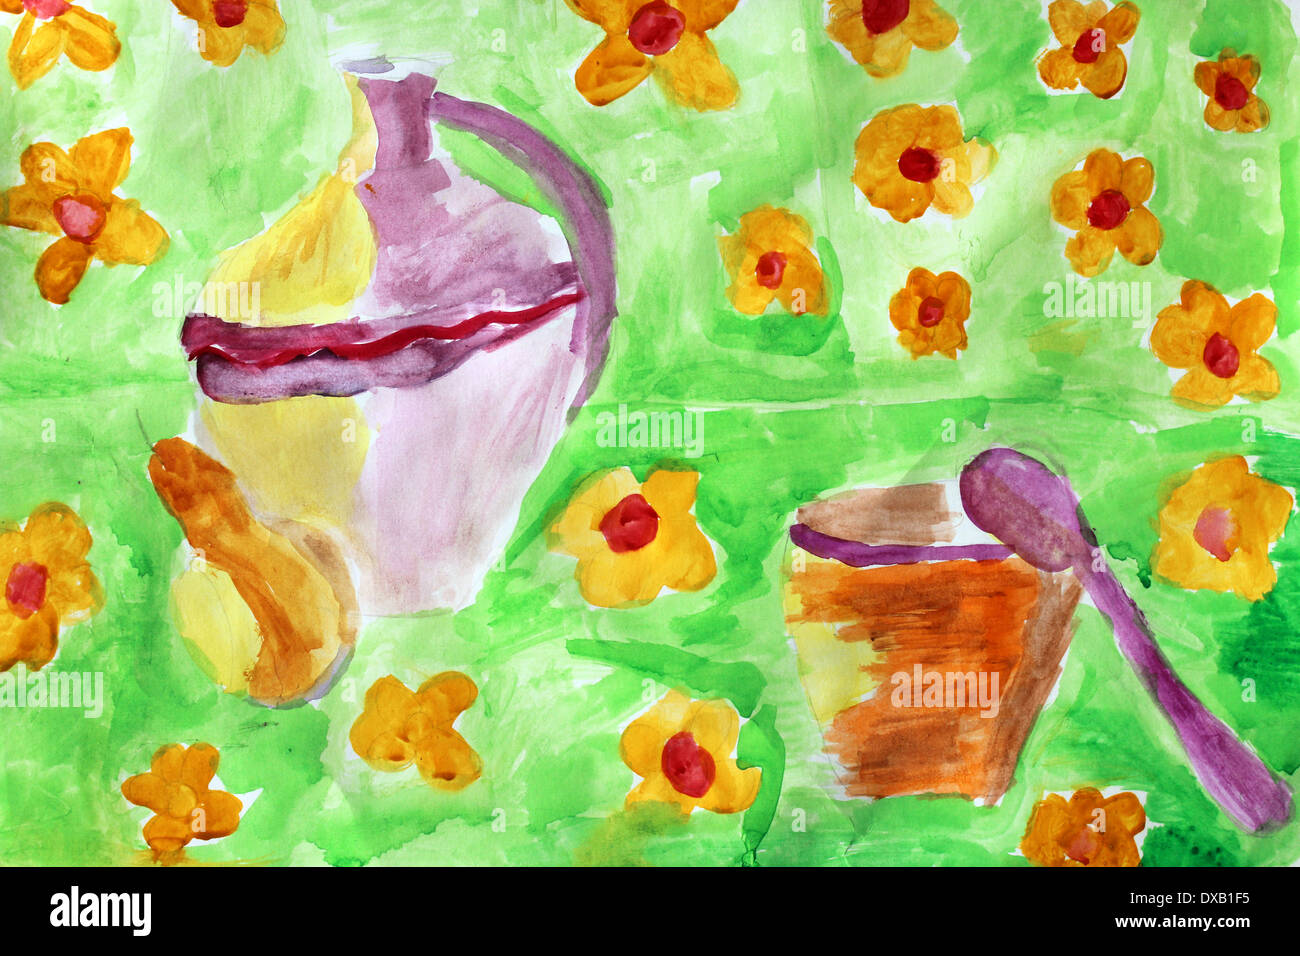 Children's drawing with brown old pitcher on the colorful background Stock Photo